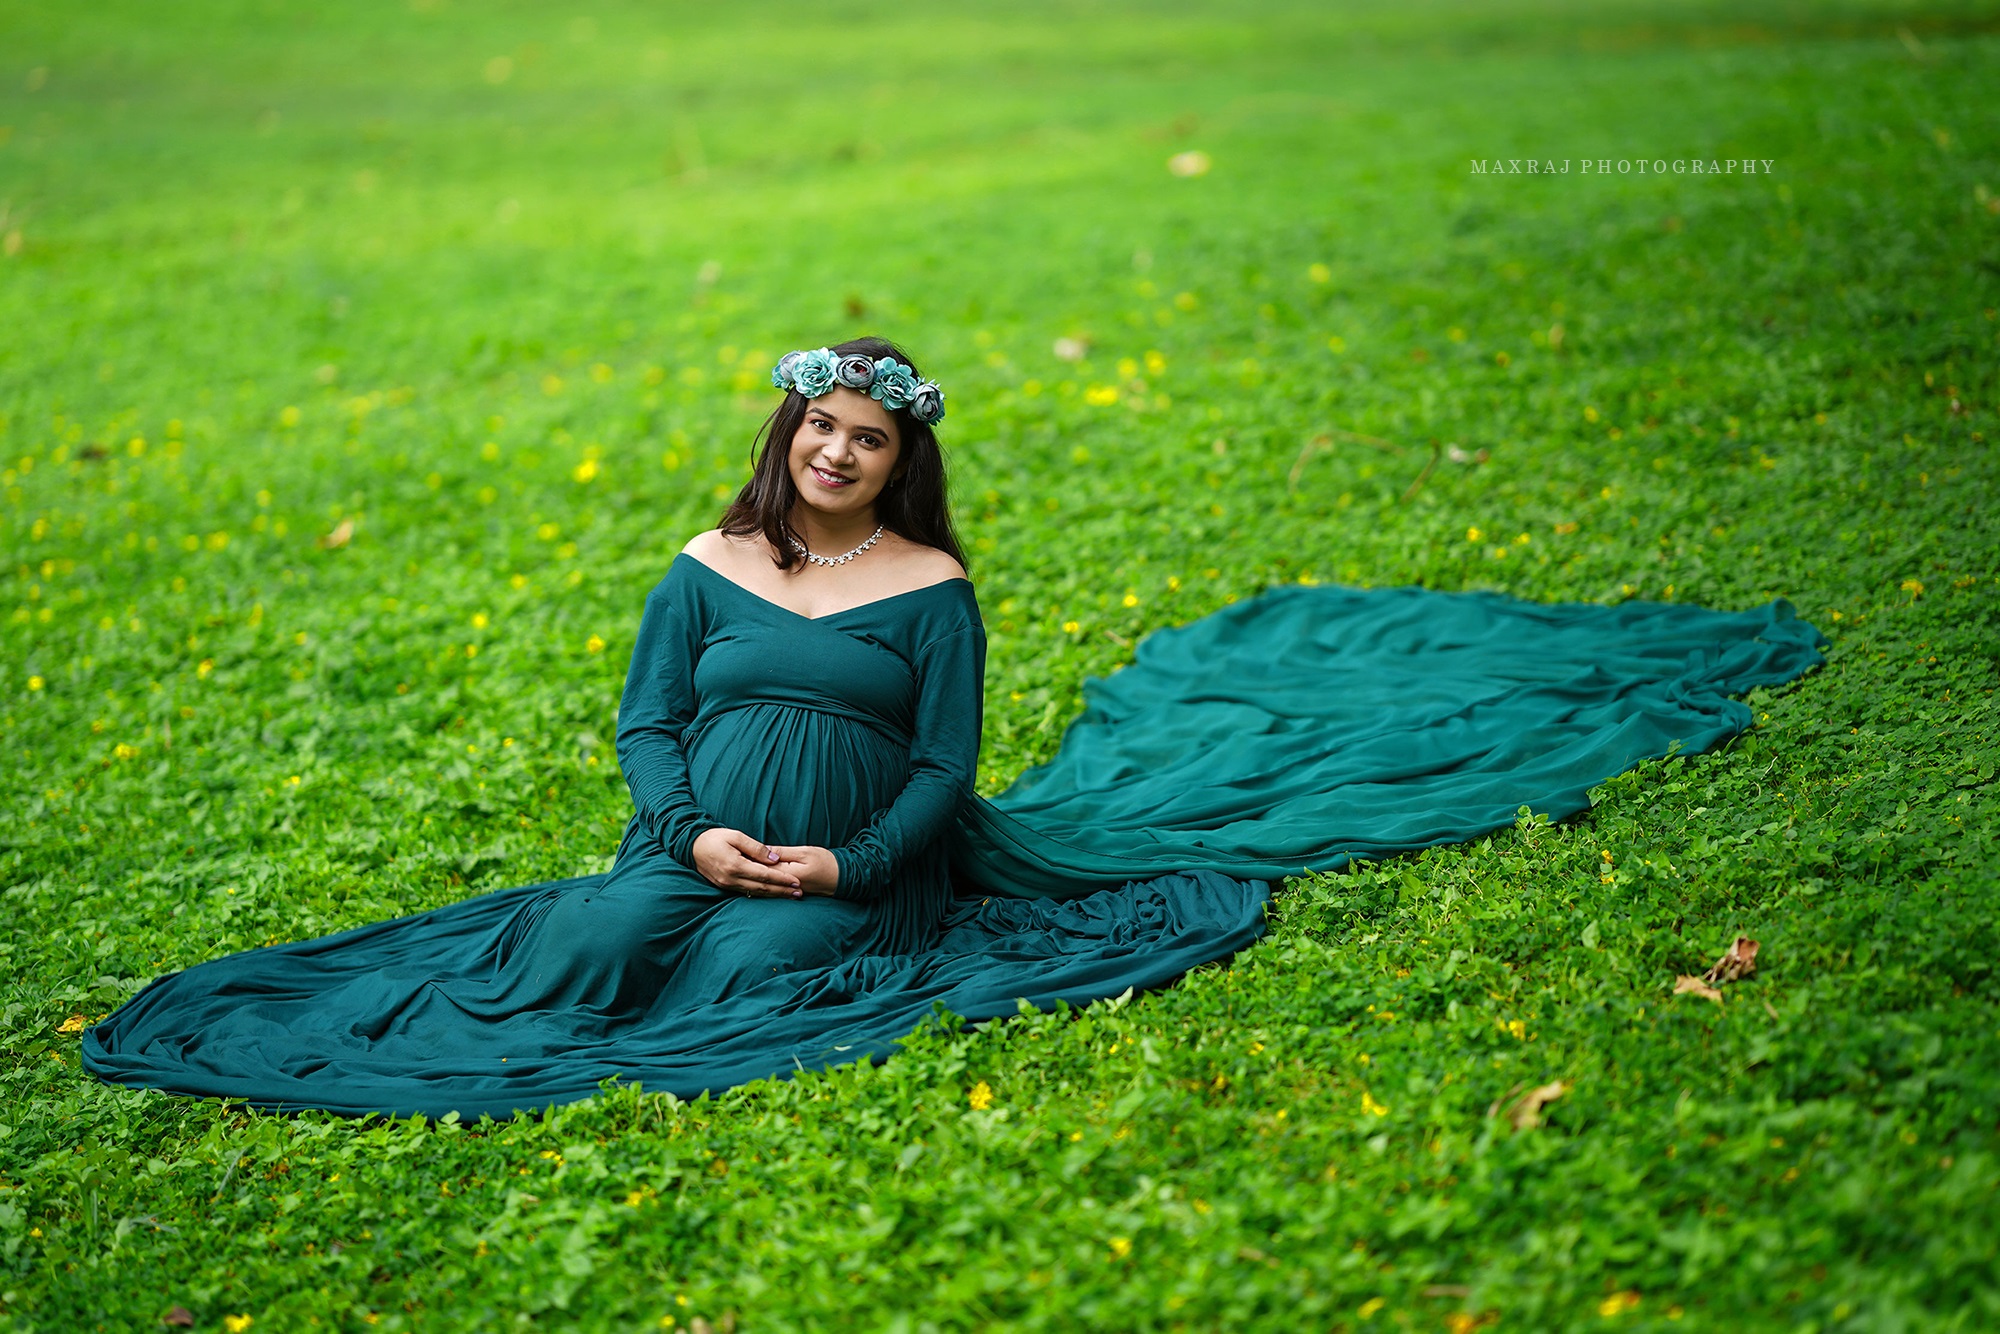 maternity photographer in pune, best maternity photographer in india, maternity photoshoot in pune in green gown in garden